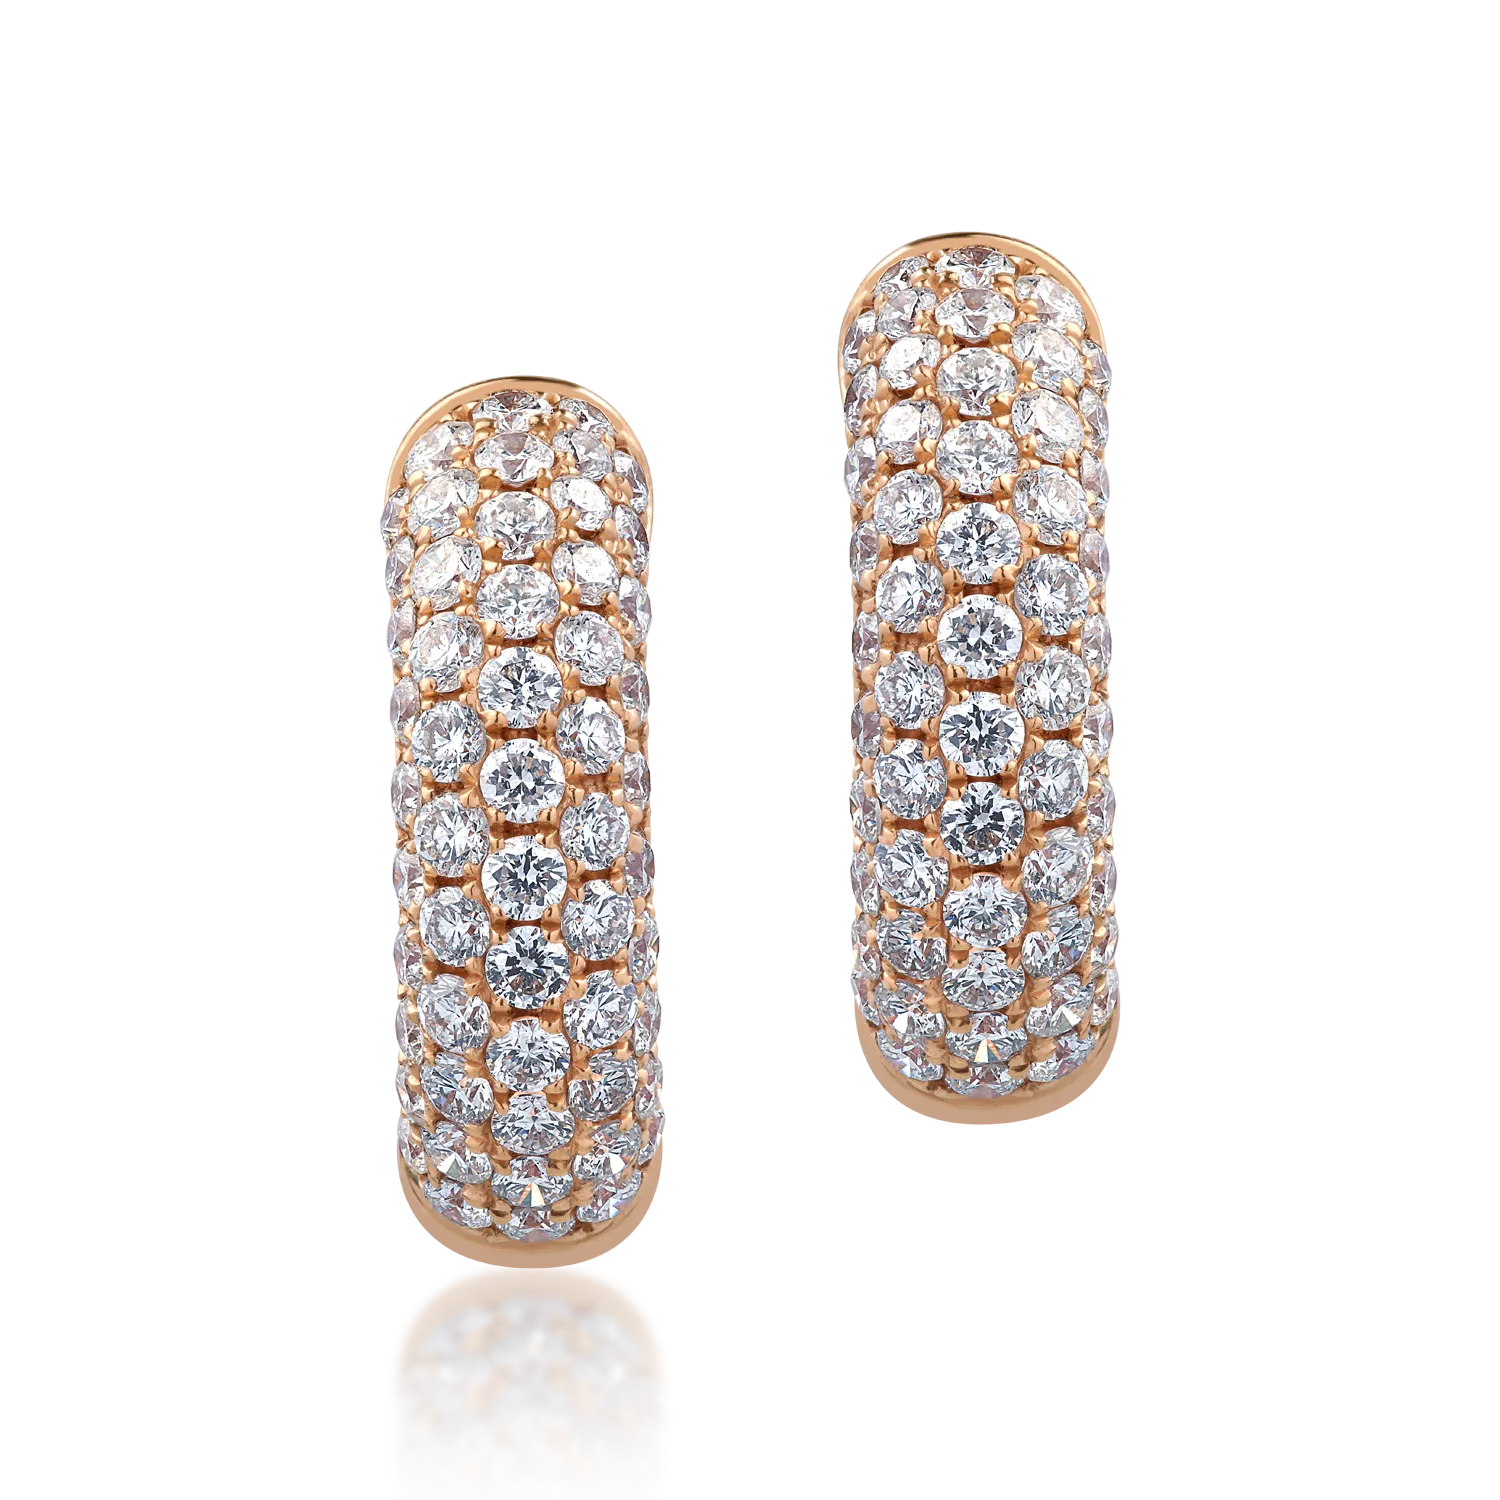 18K rose gold earrings with 1.26ct diamonds